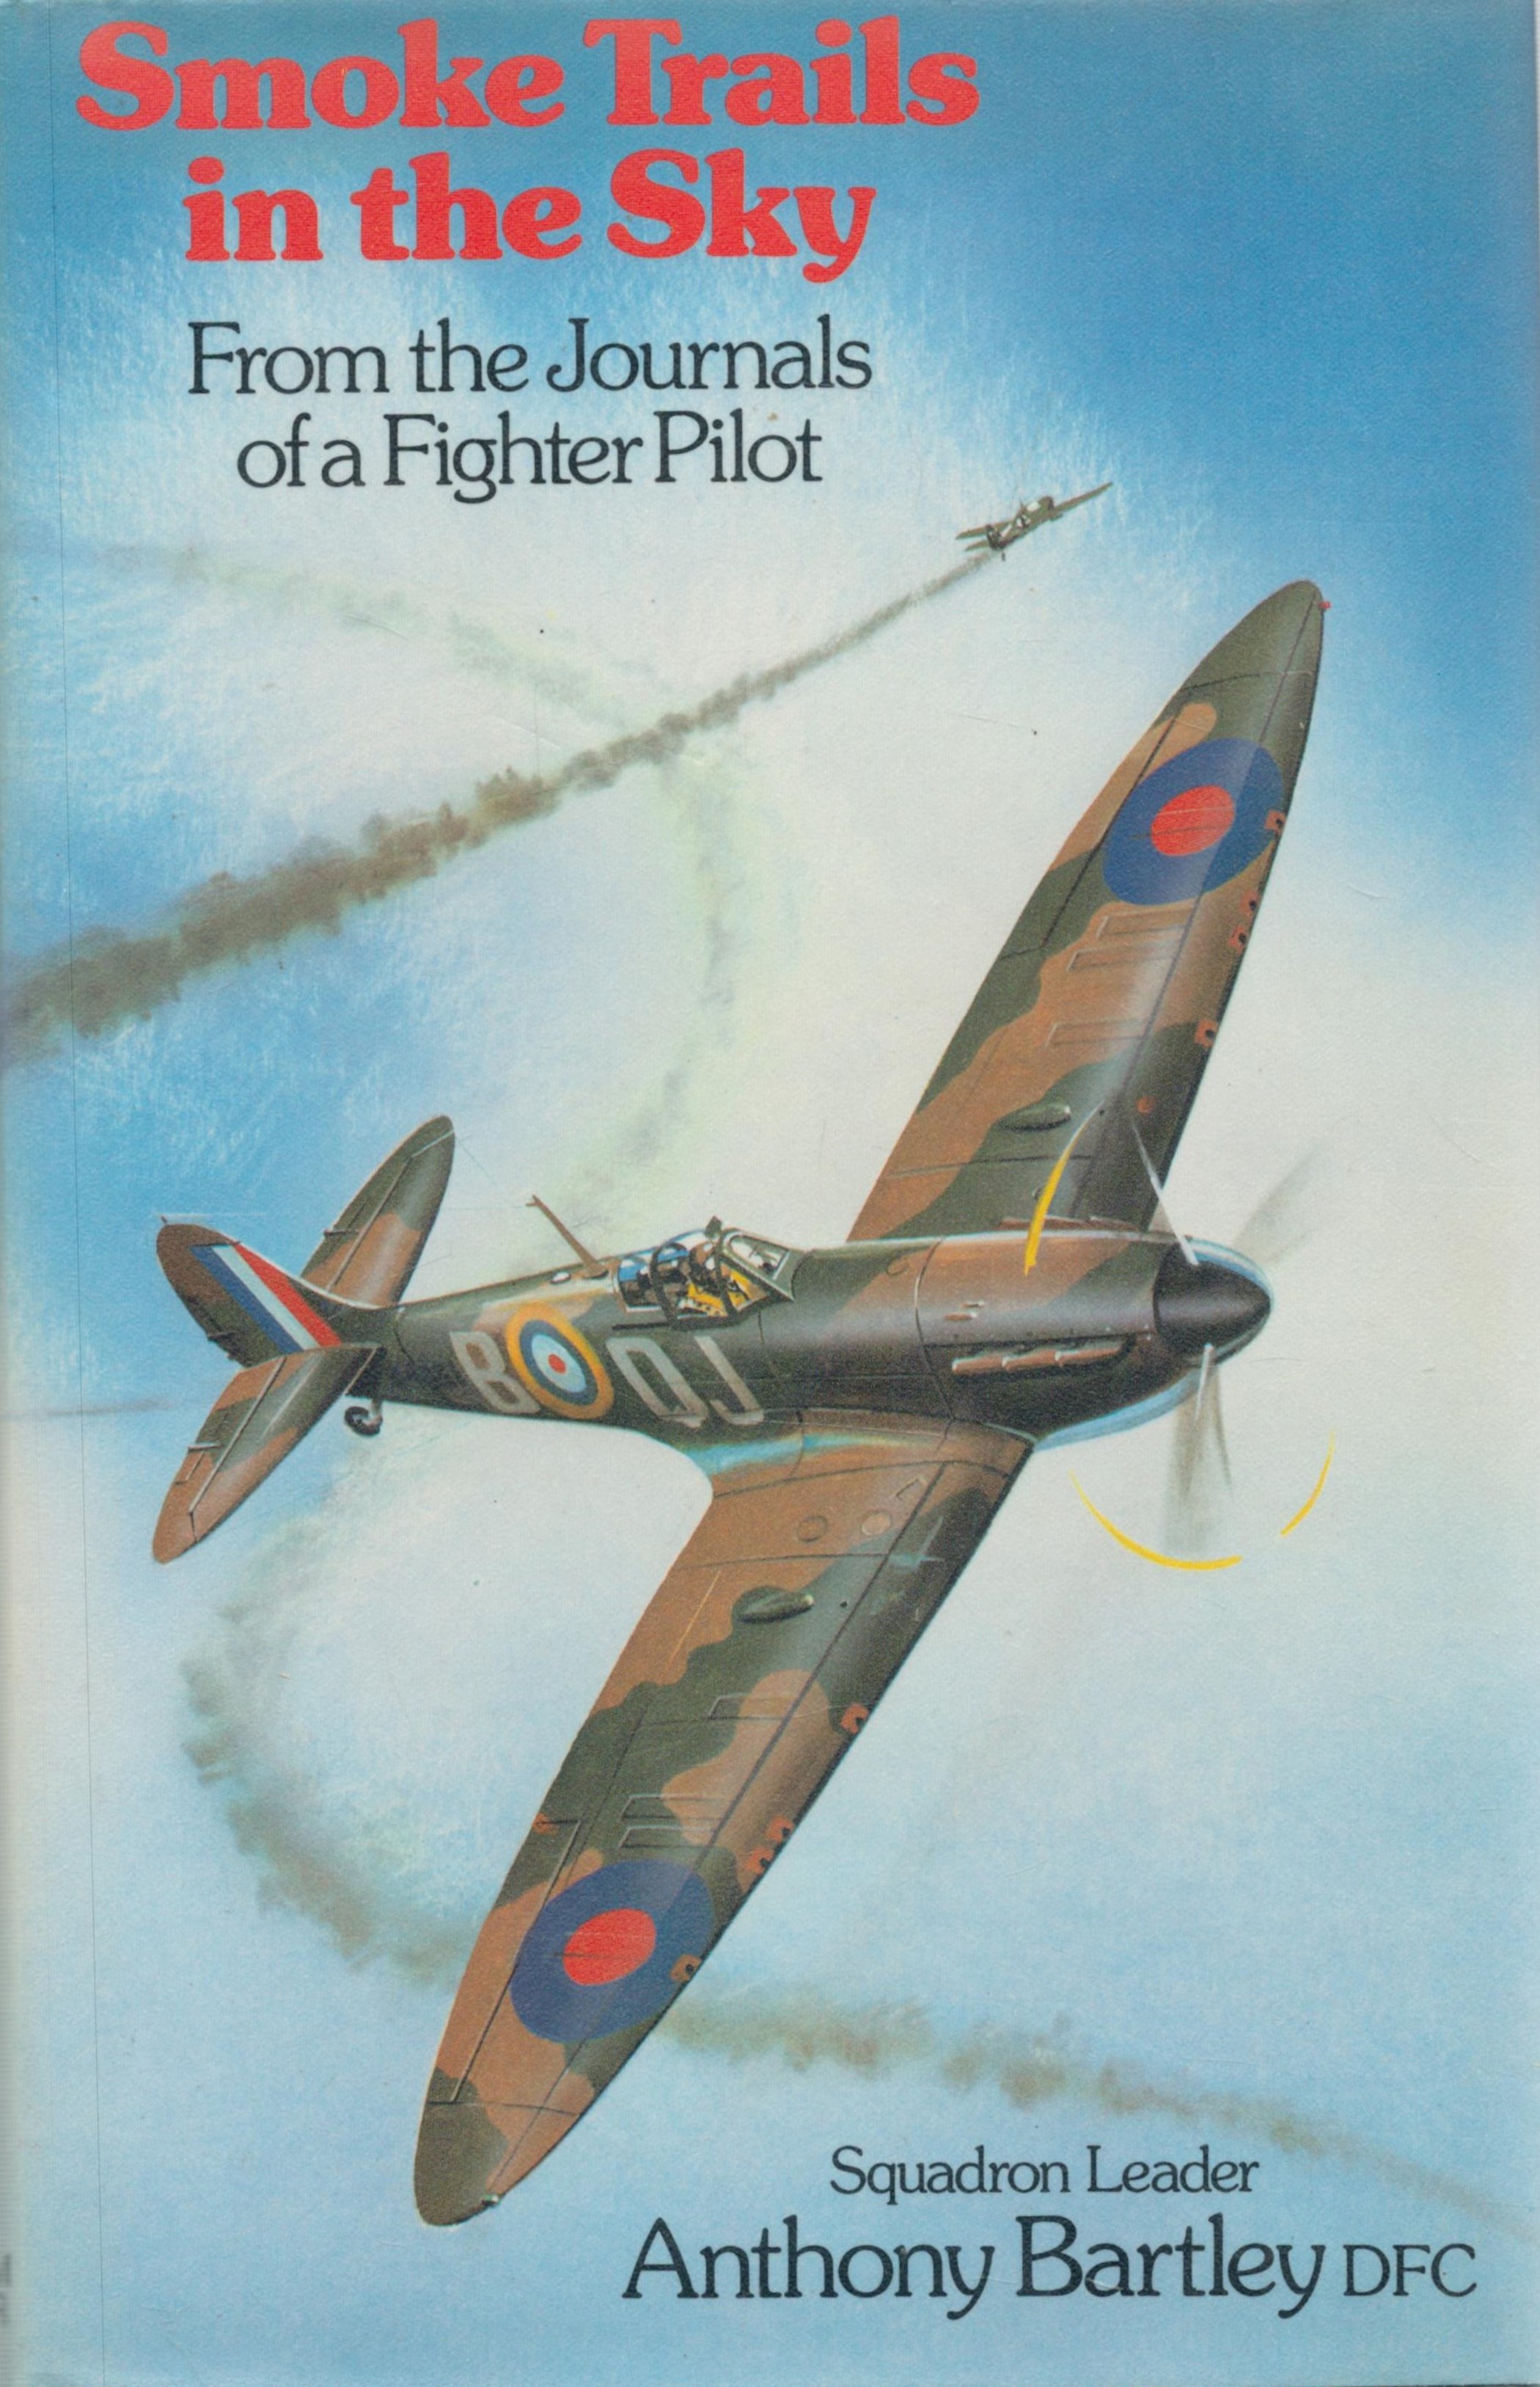 Squadron Leader Anthony Bartley DFC Signed Book Smoke Trails in the Sky From the Journals of a